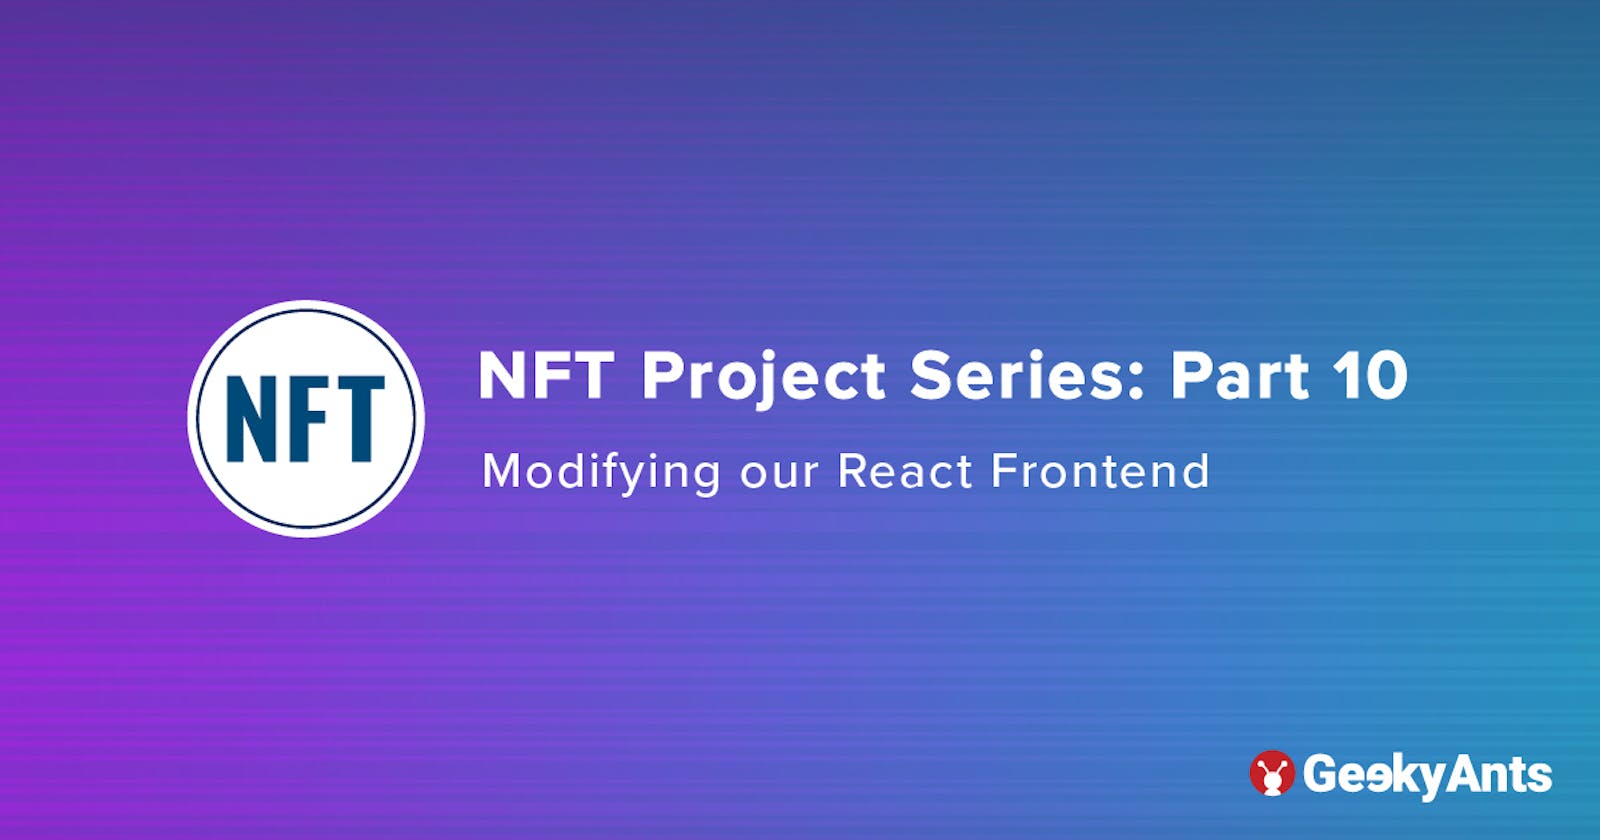 NFT Project Series Part 10: Modifying our React Frontend